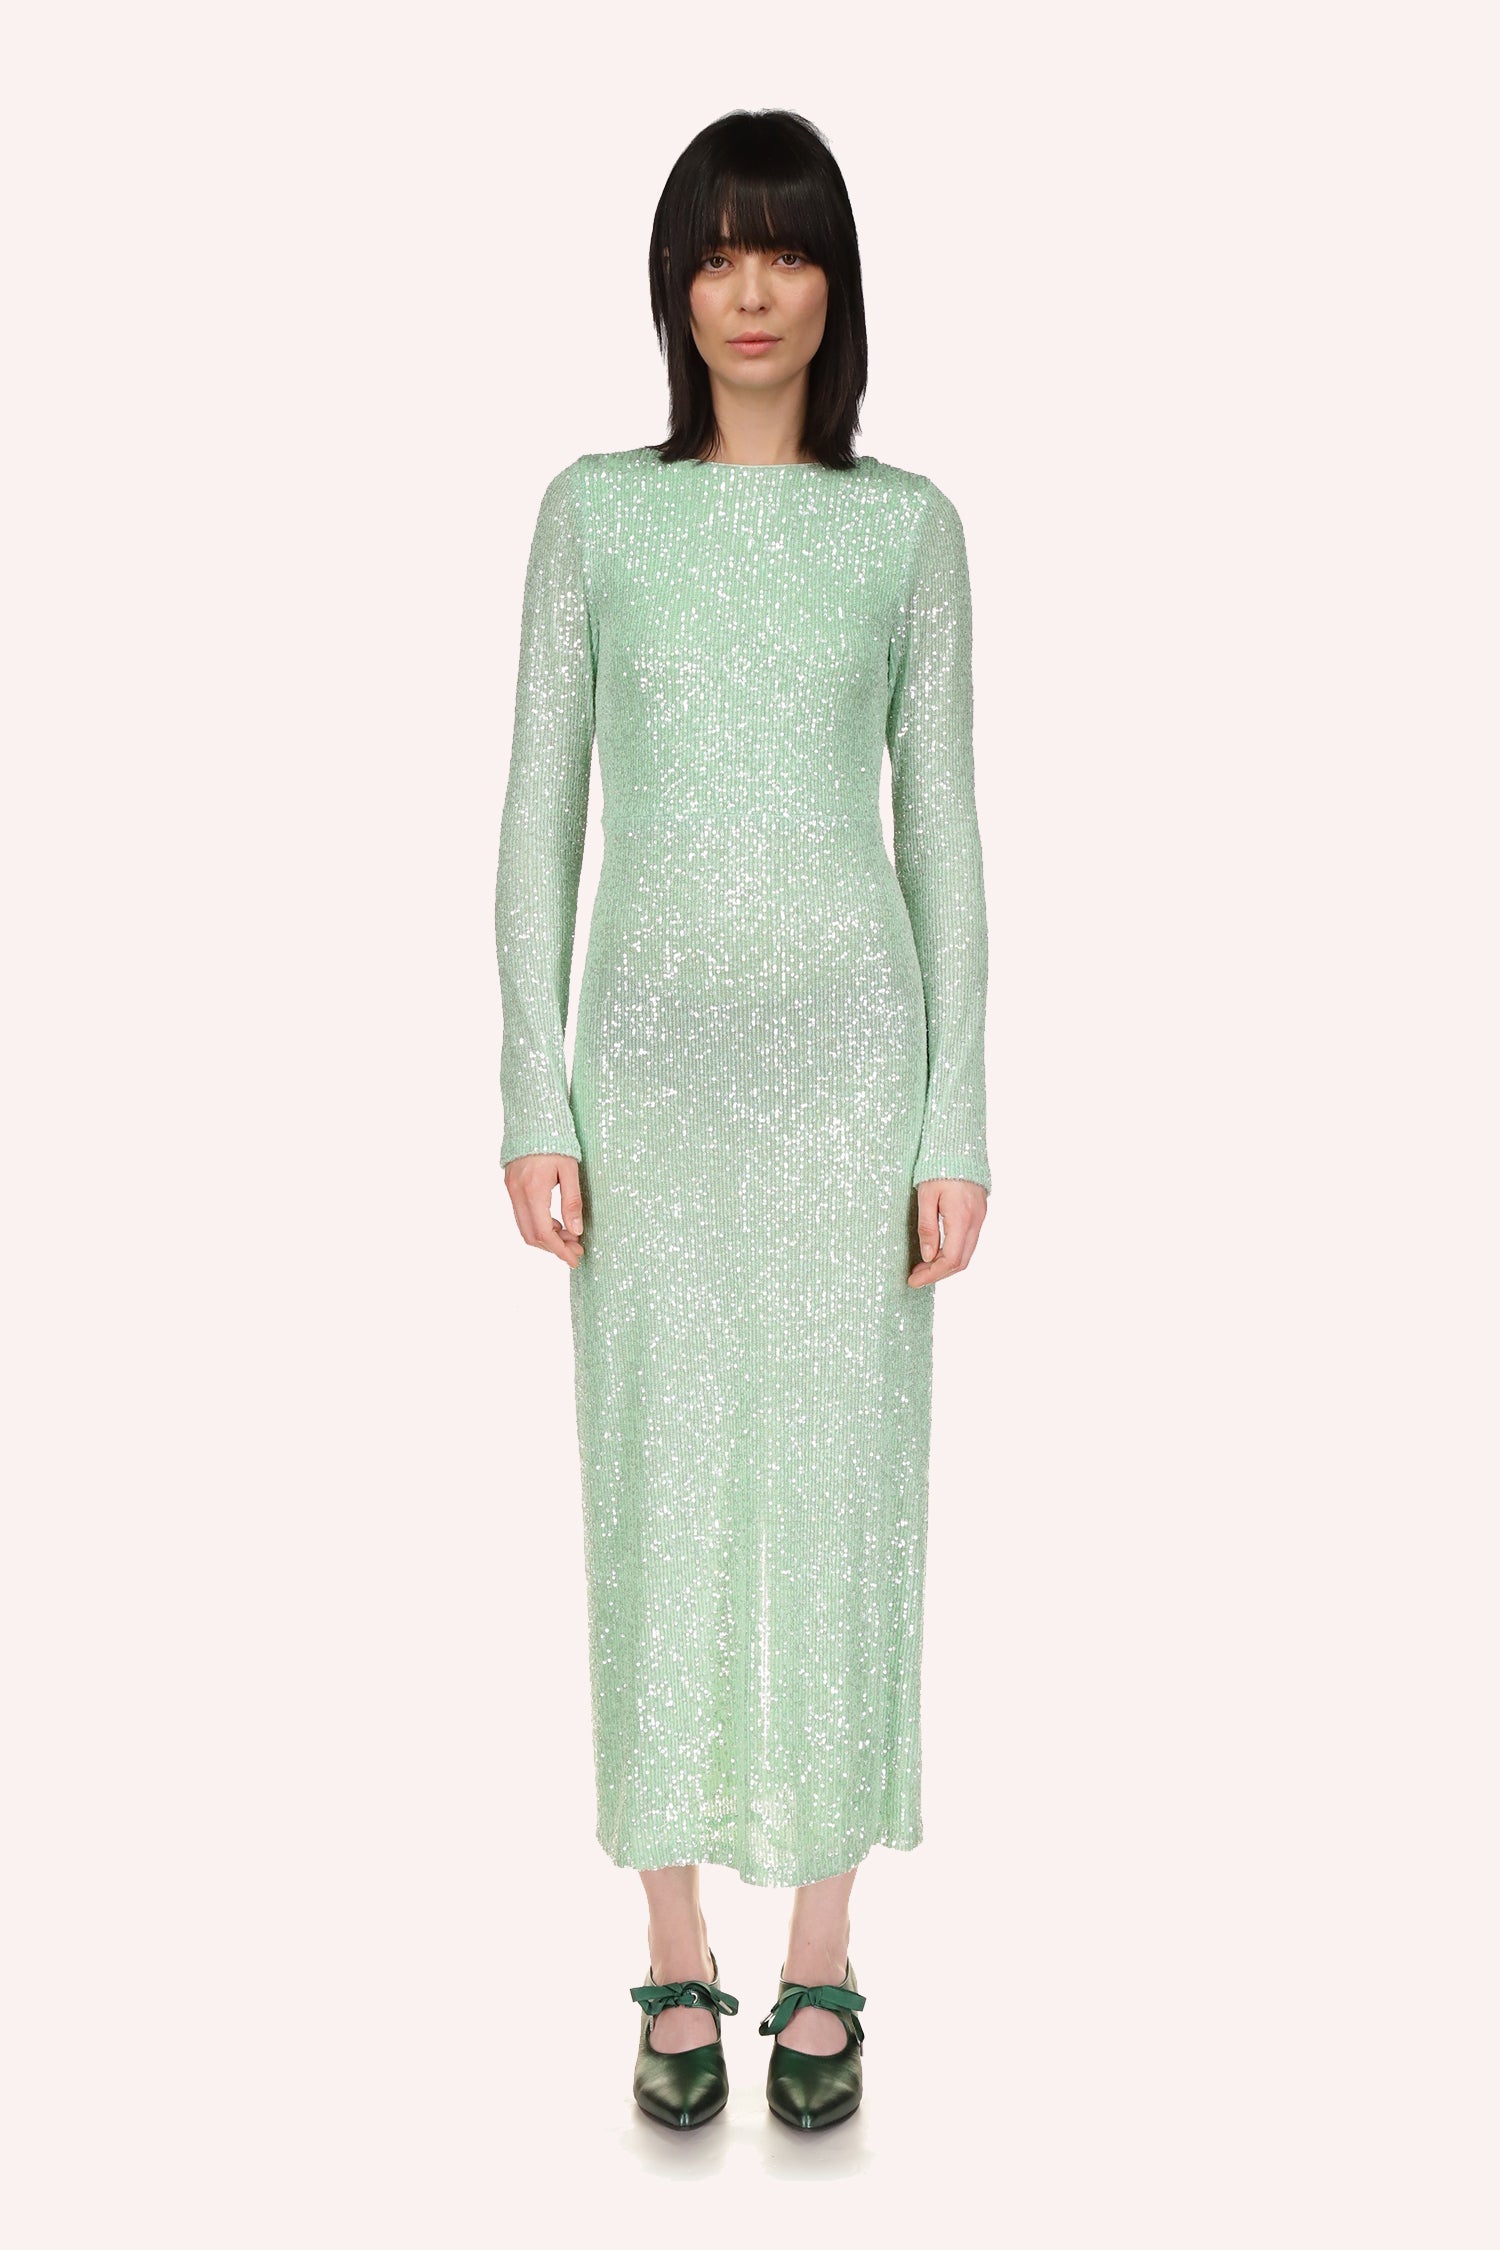 Anna Sui's Sequin Mesh Dress, peppermint, long sleeves, and a collar frames the neckline